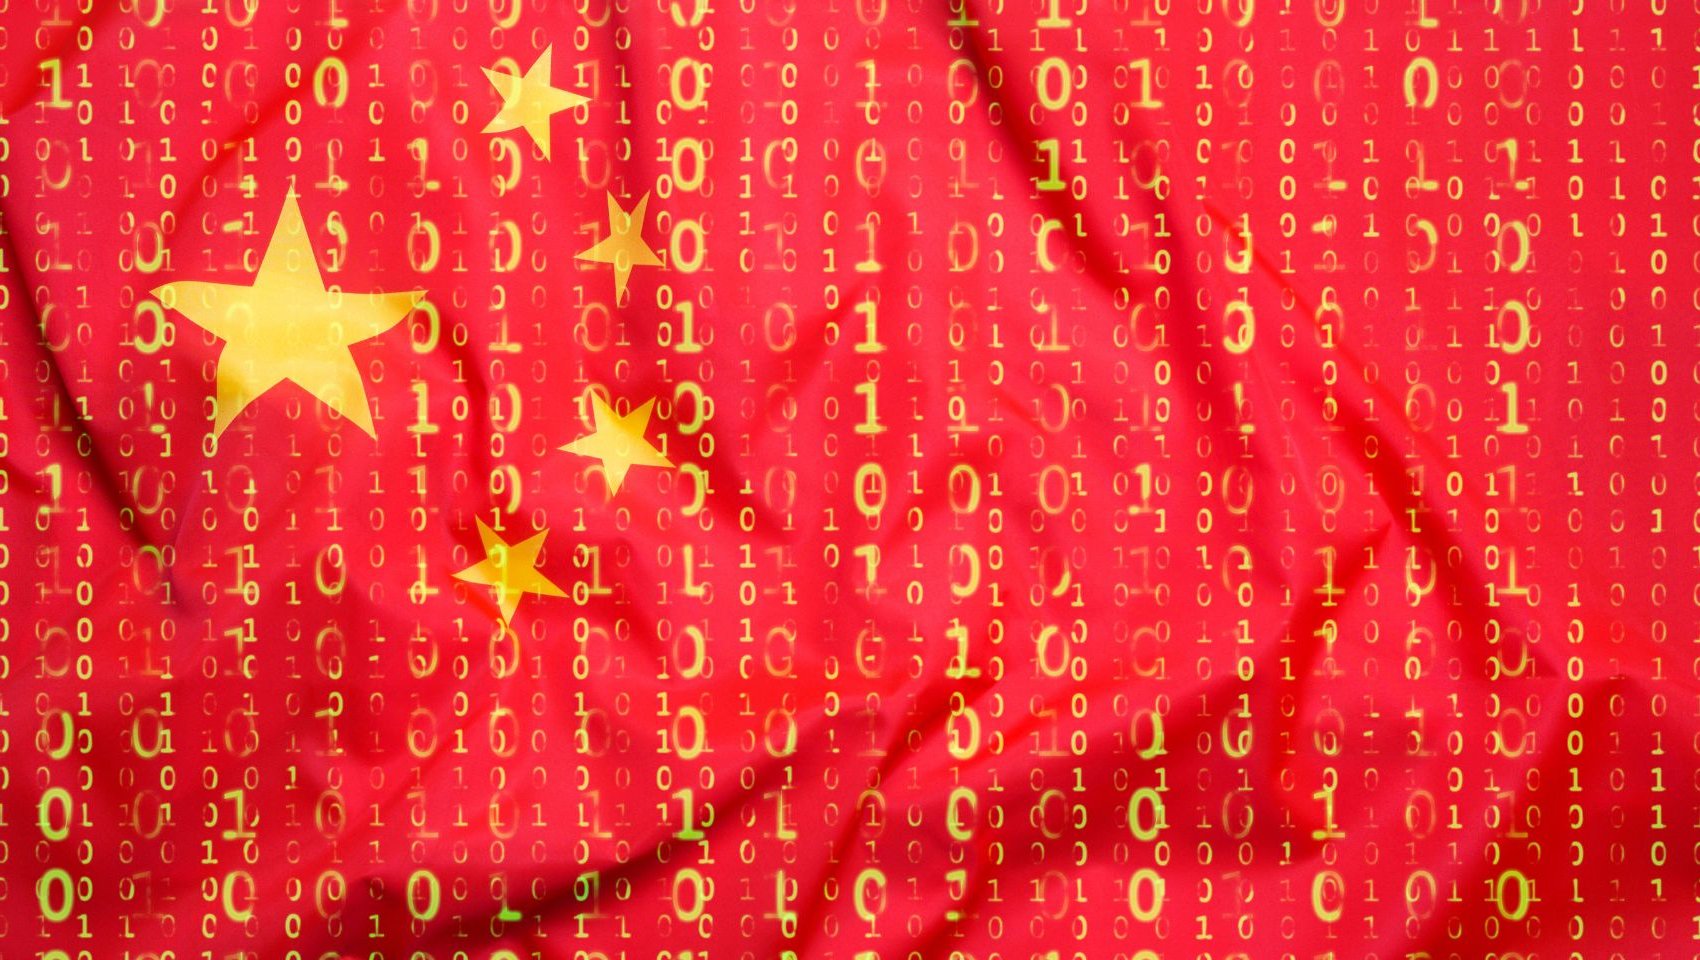 Inside China’s cyber system – China’s cybersecurity landscape